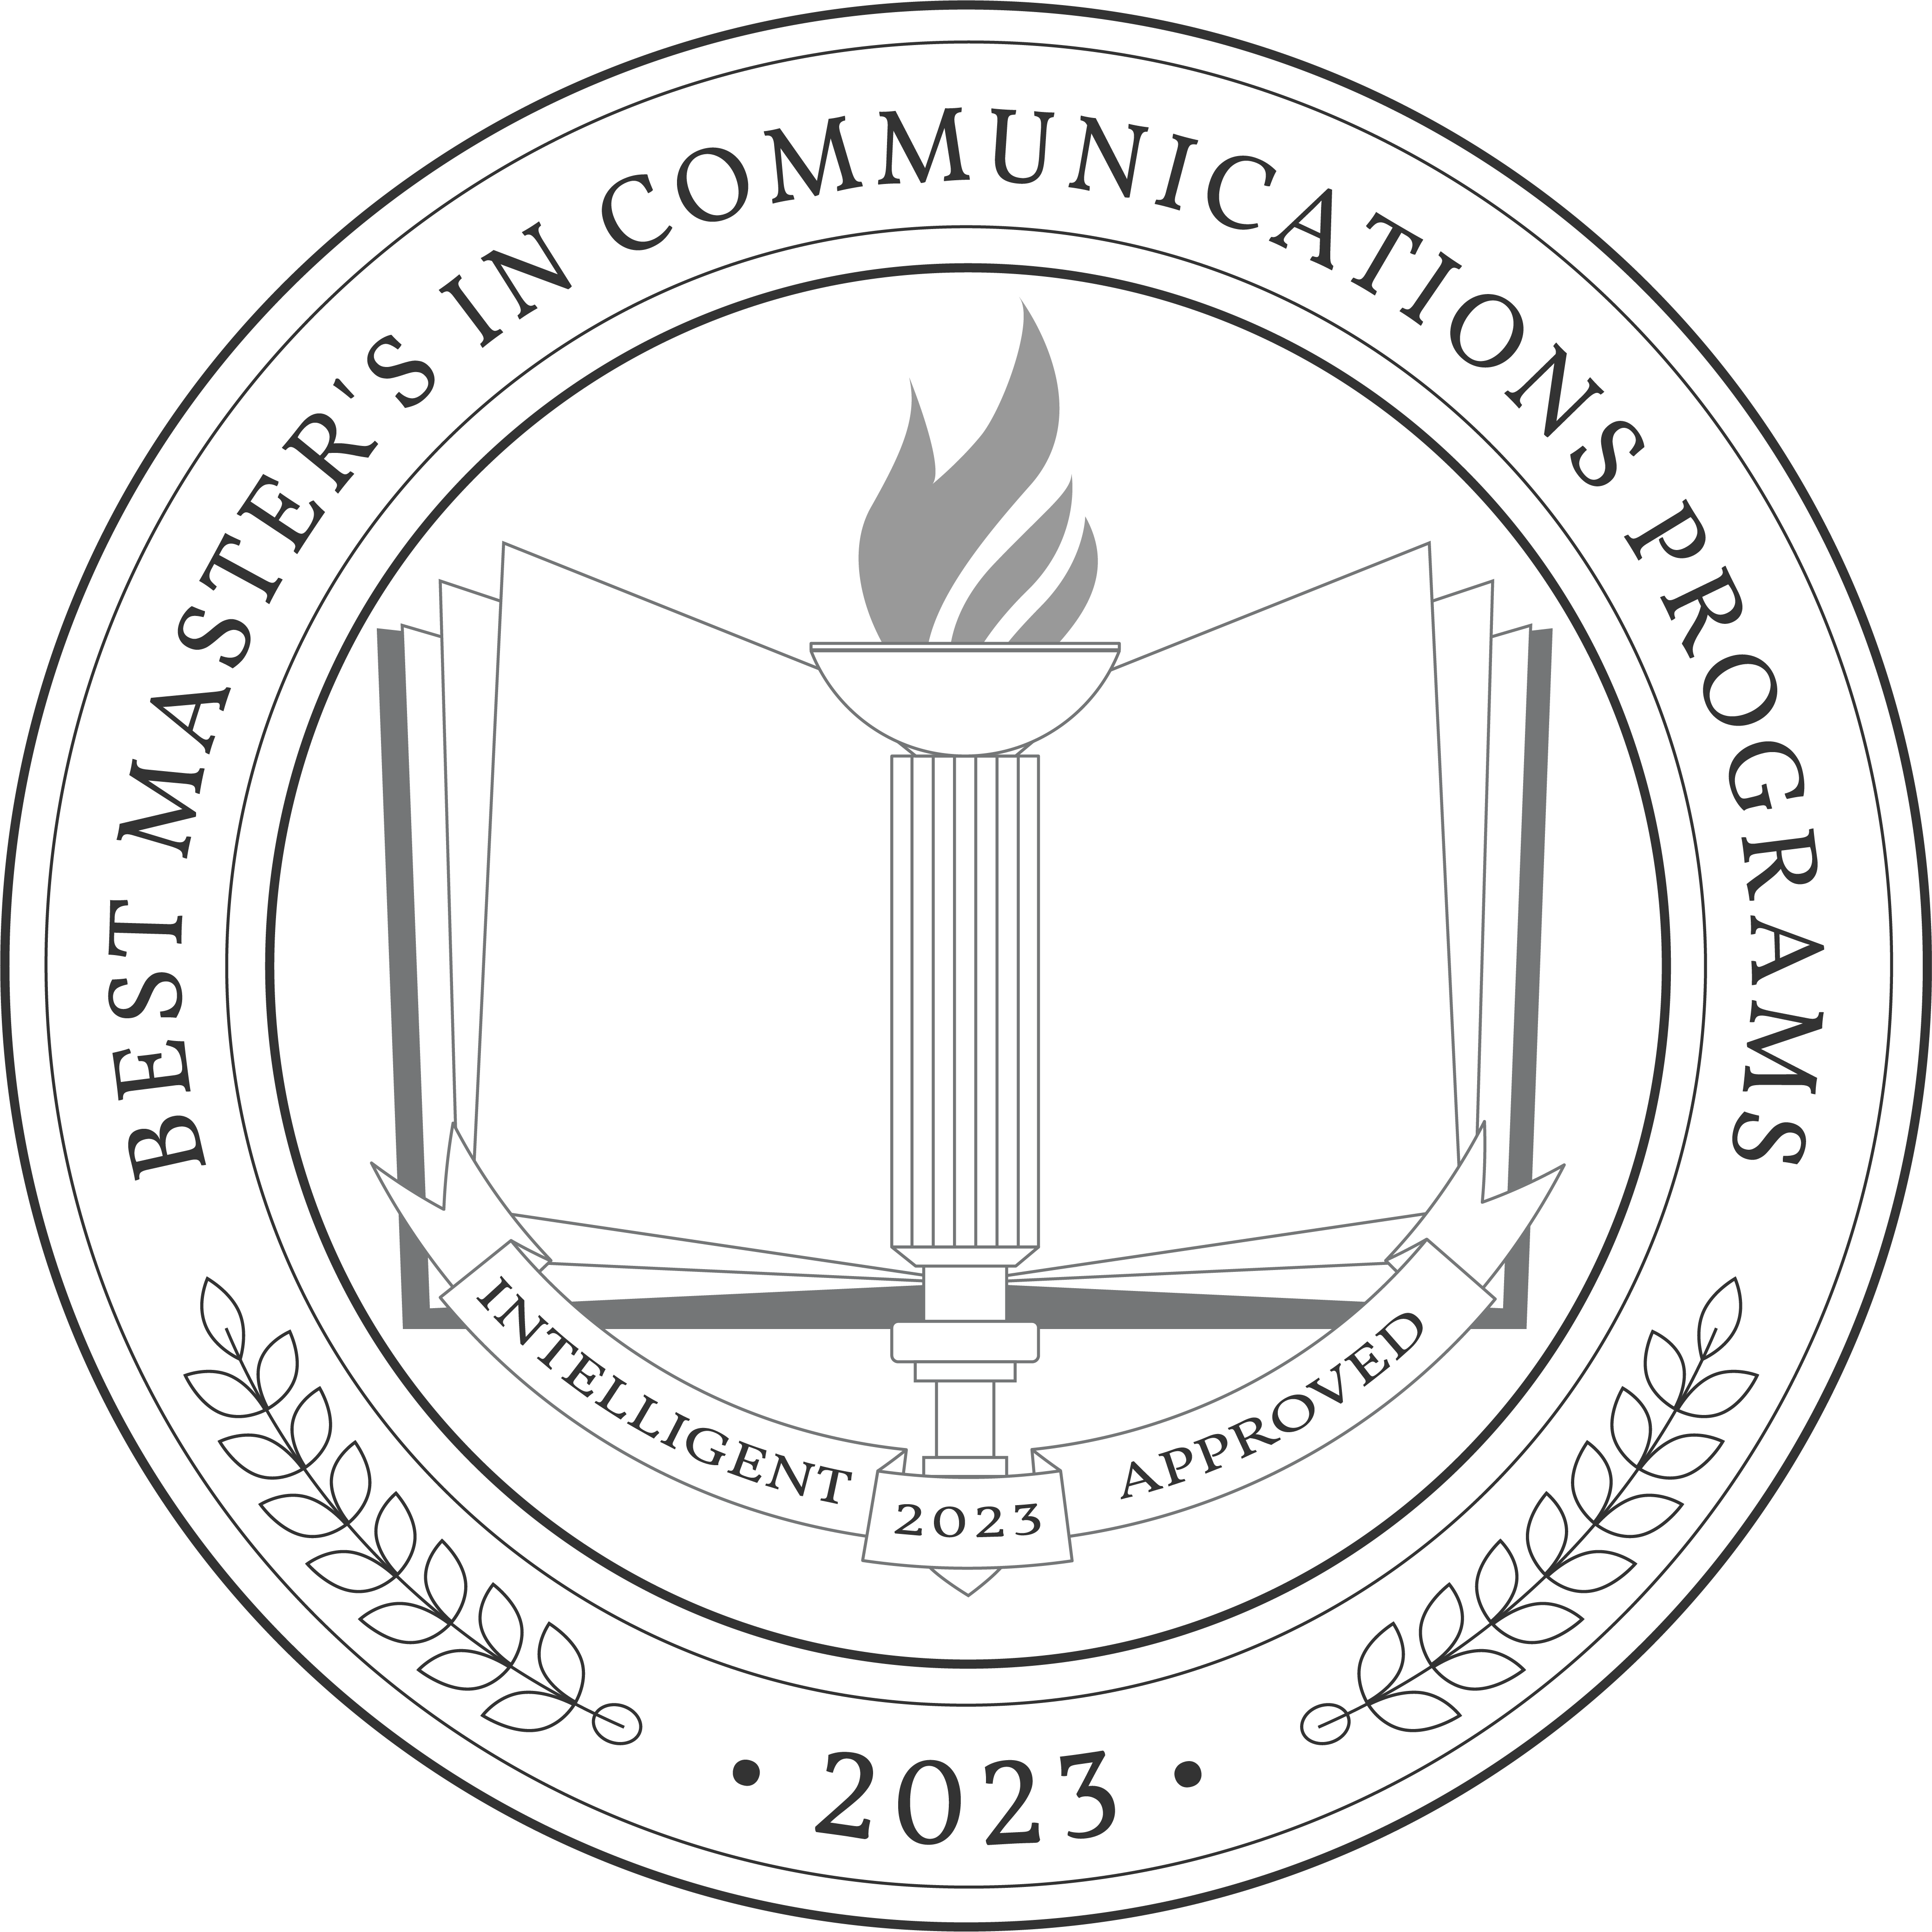 Best Master's in Communications Programs 2023